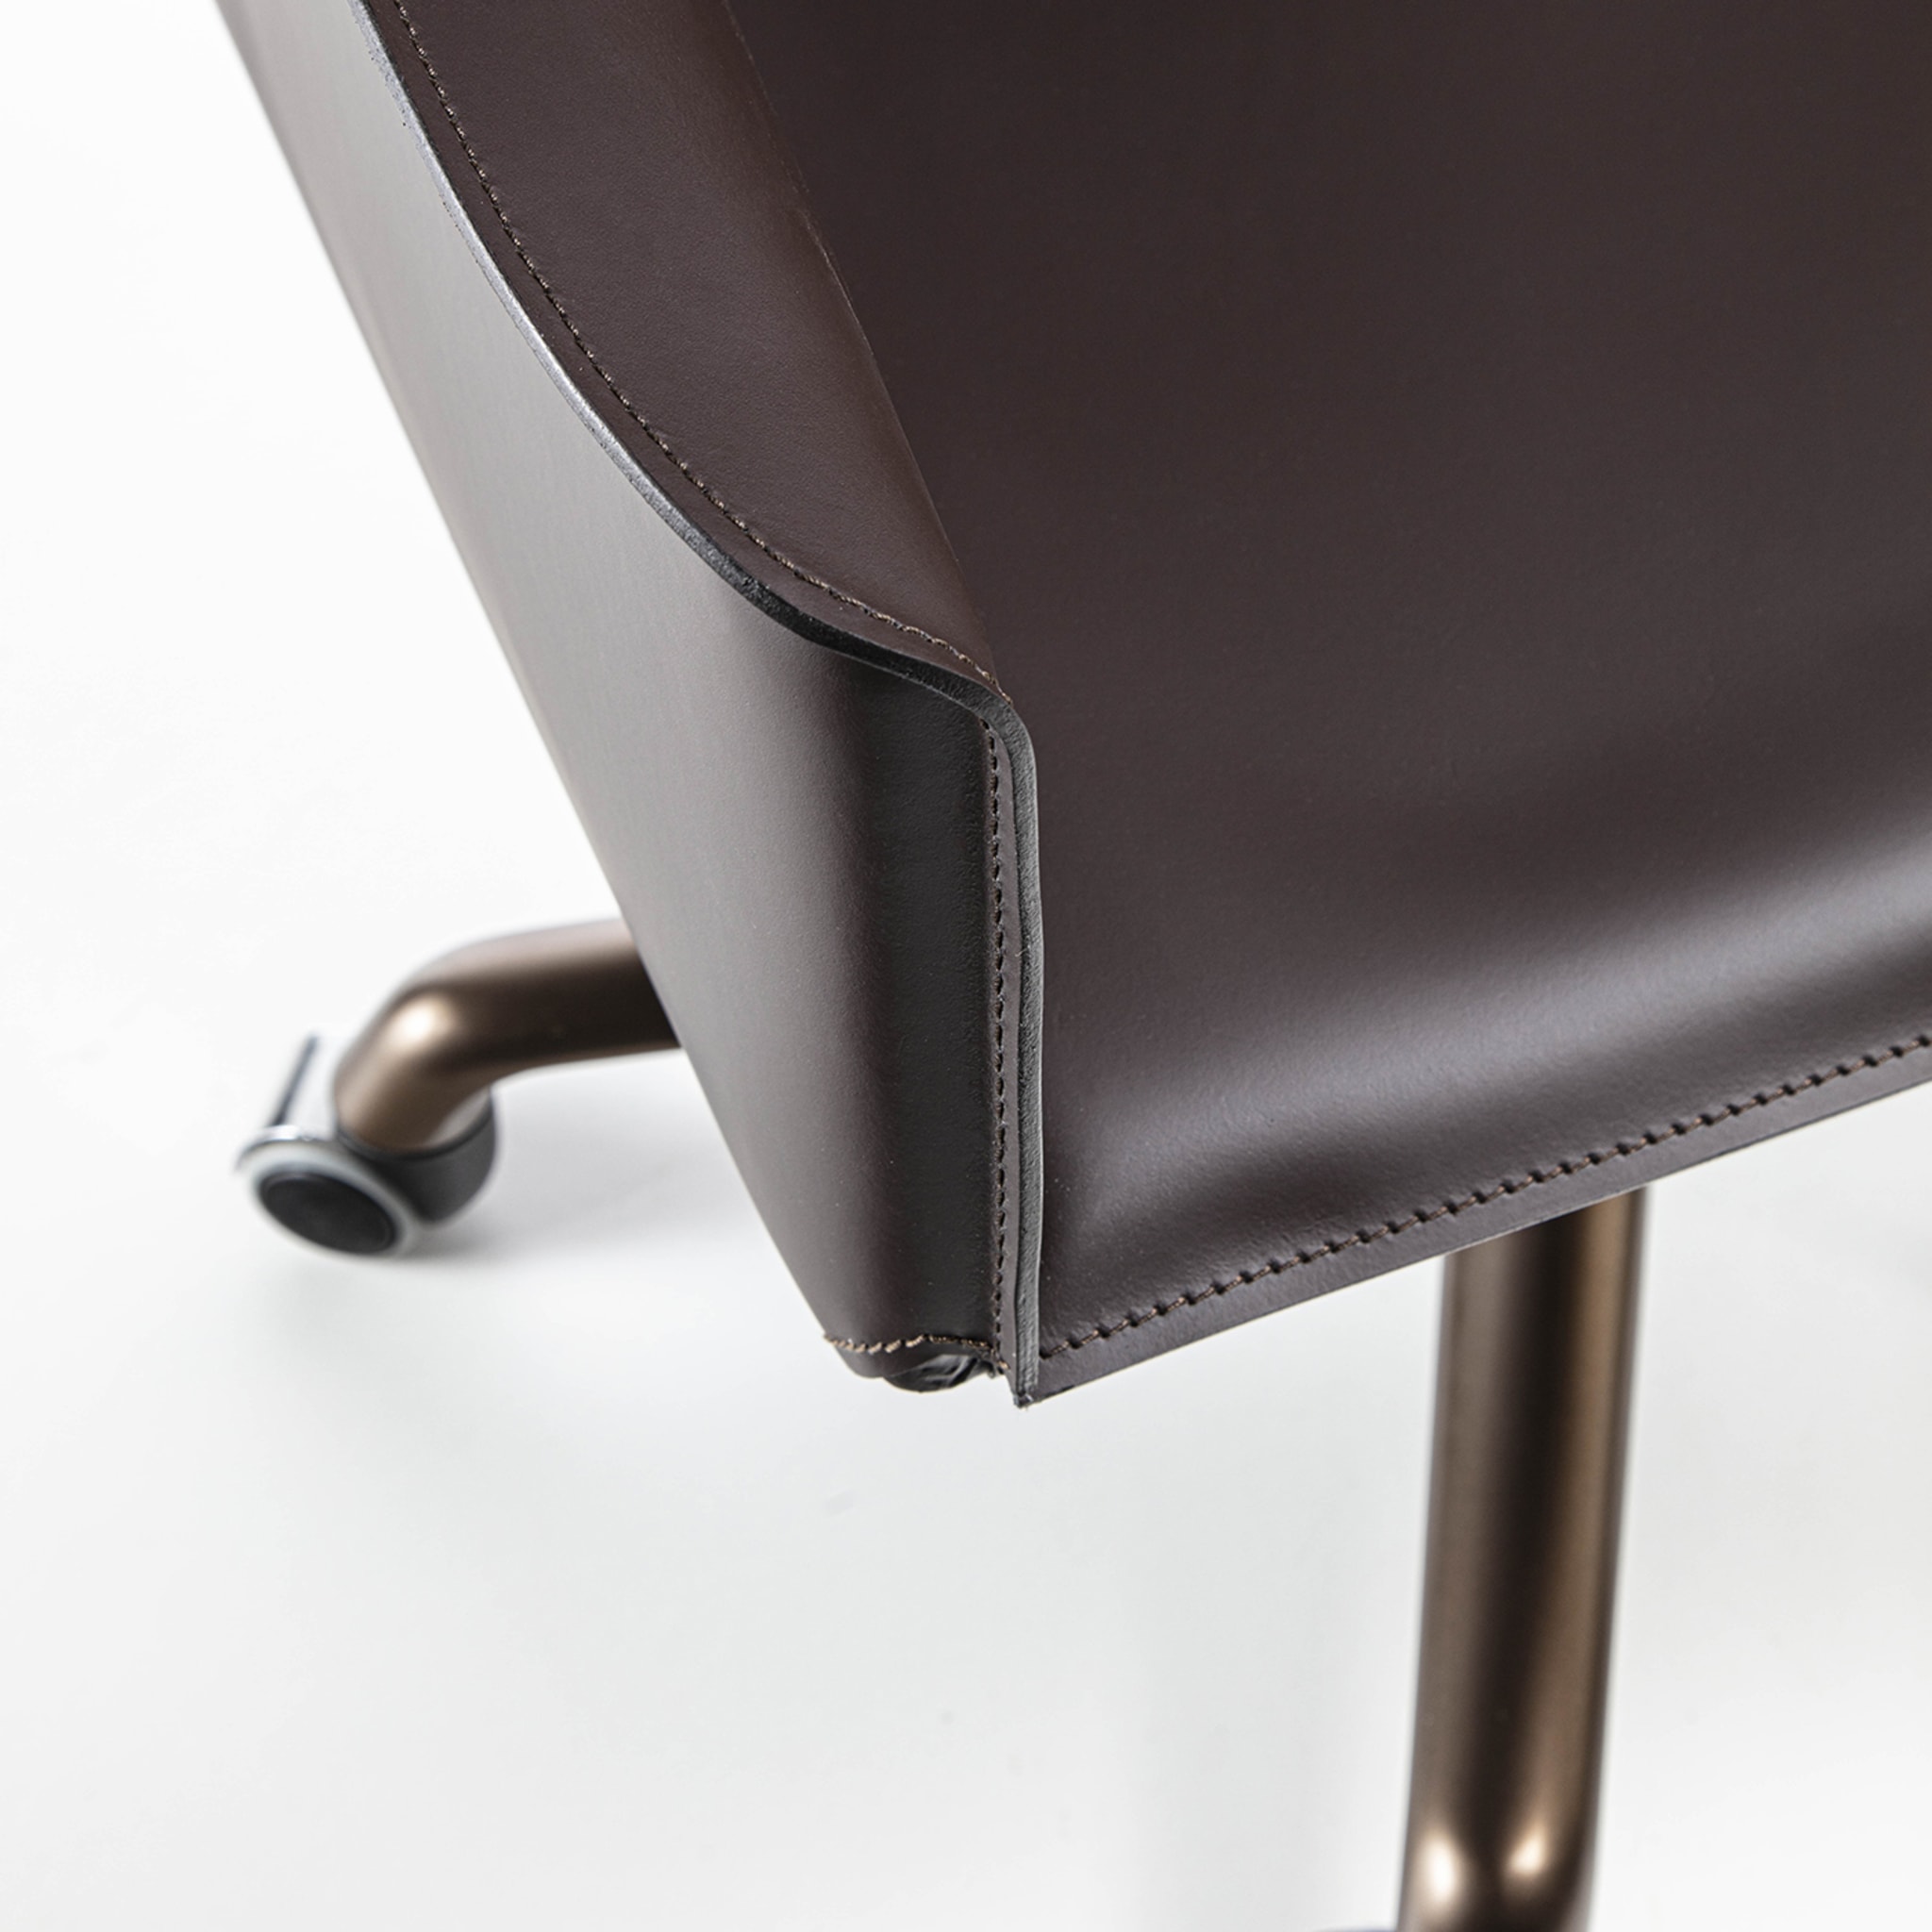 Pasqualina Swivel President Chair by Grassi&Bianchi and RedCreative - Alternative view 1